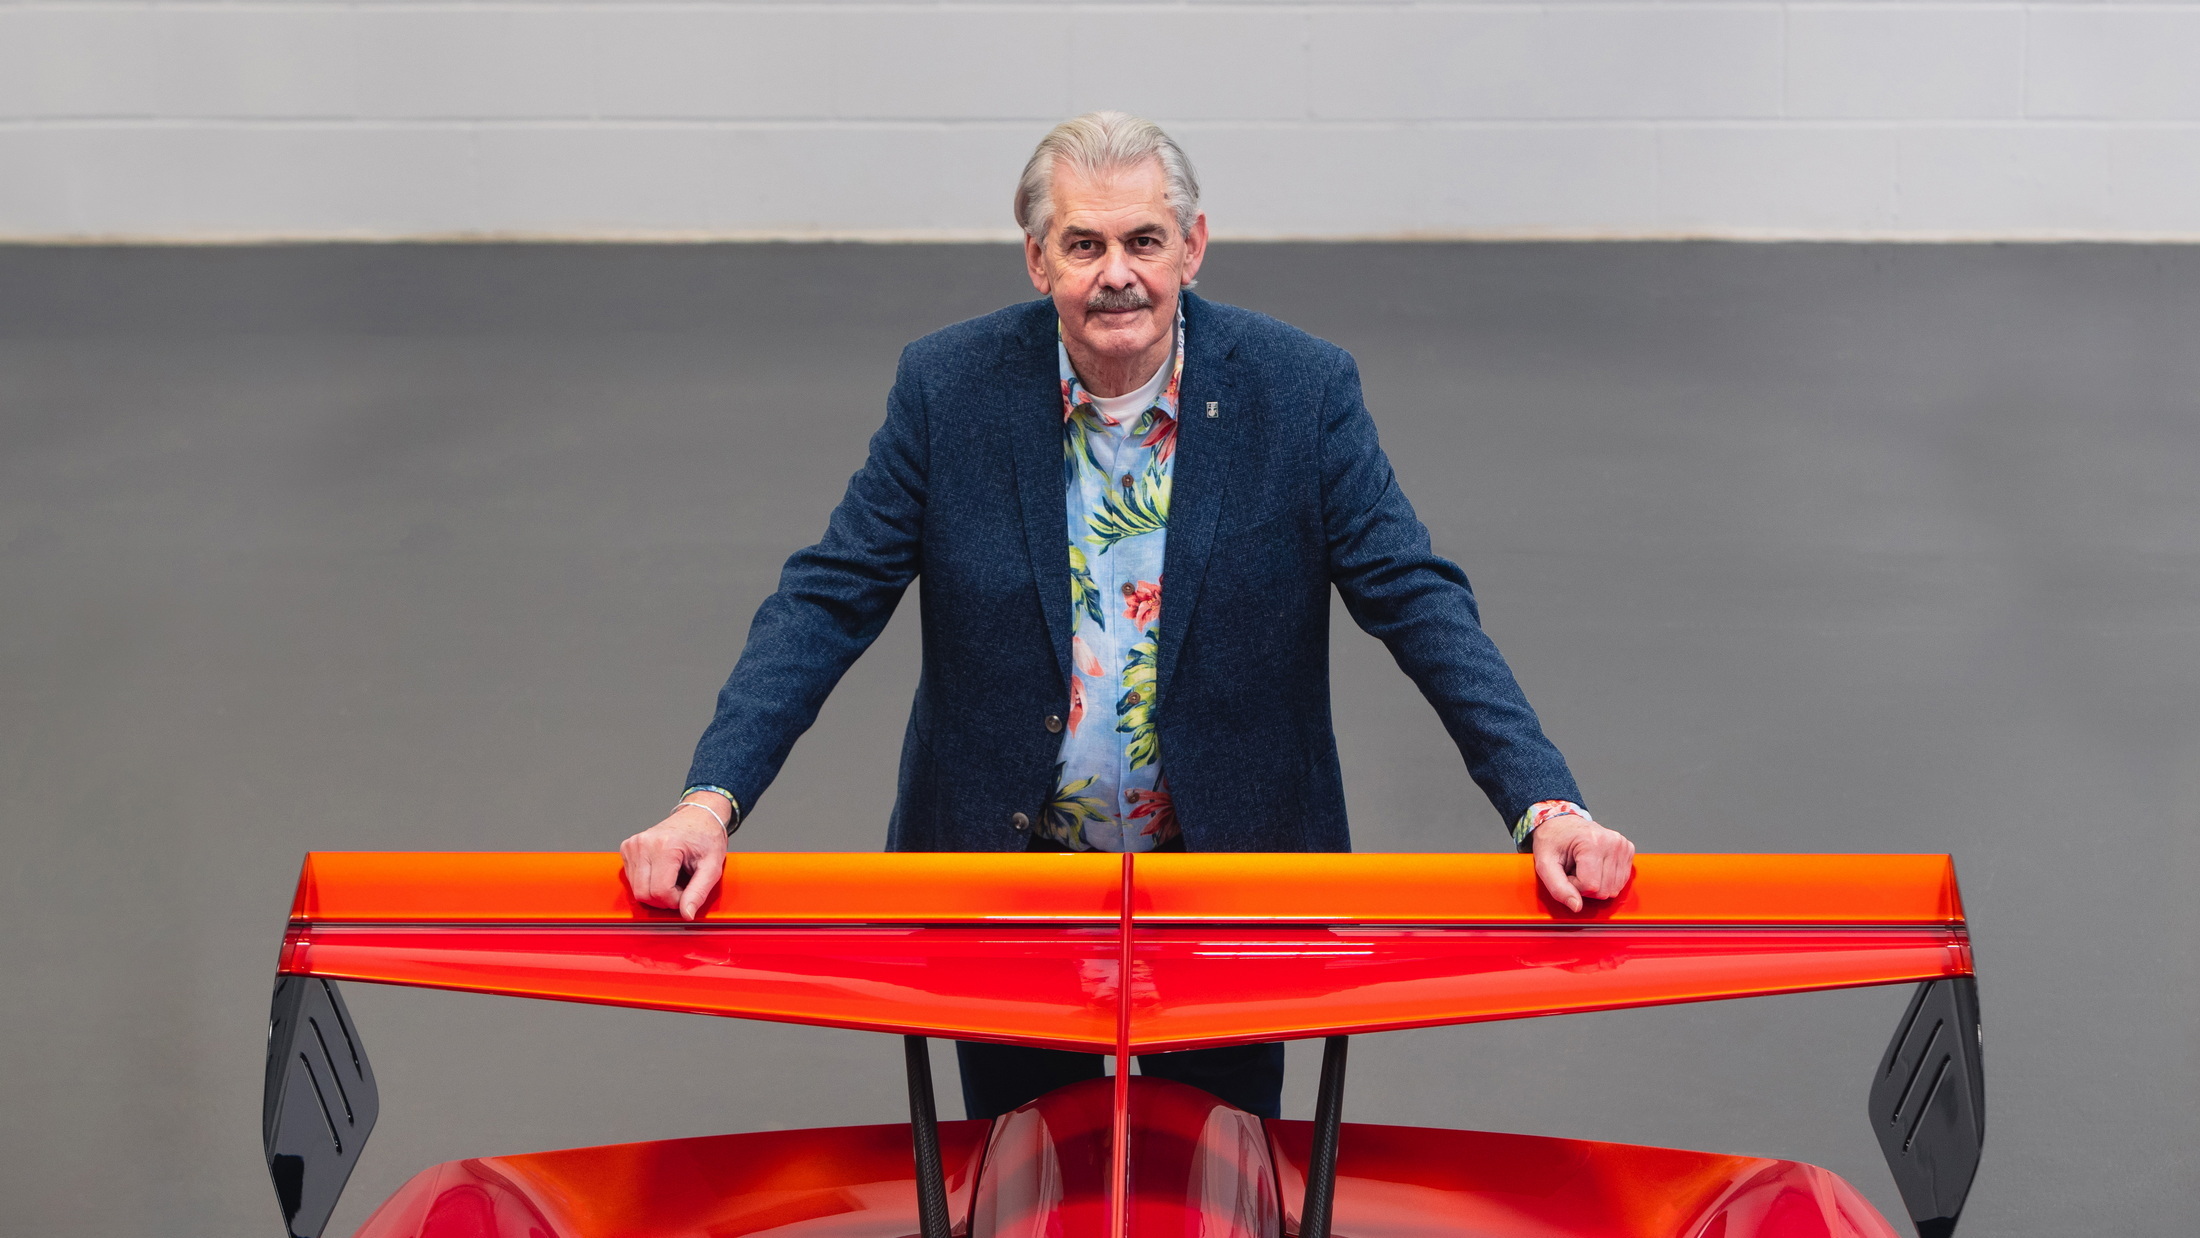 The GBP 1.37 million Gordon Murray Automotive sold out withing a week